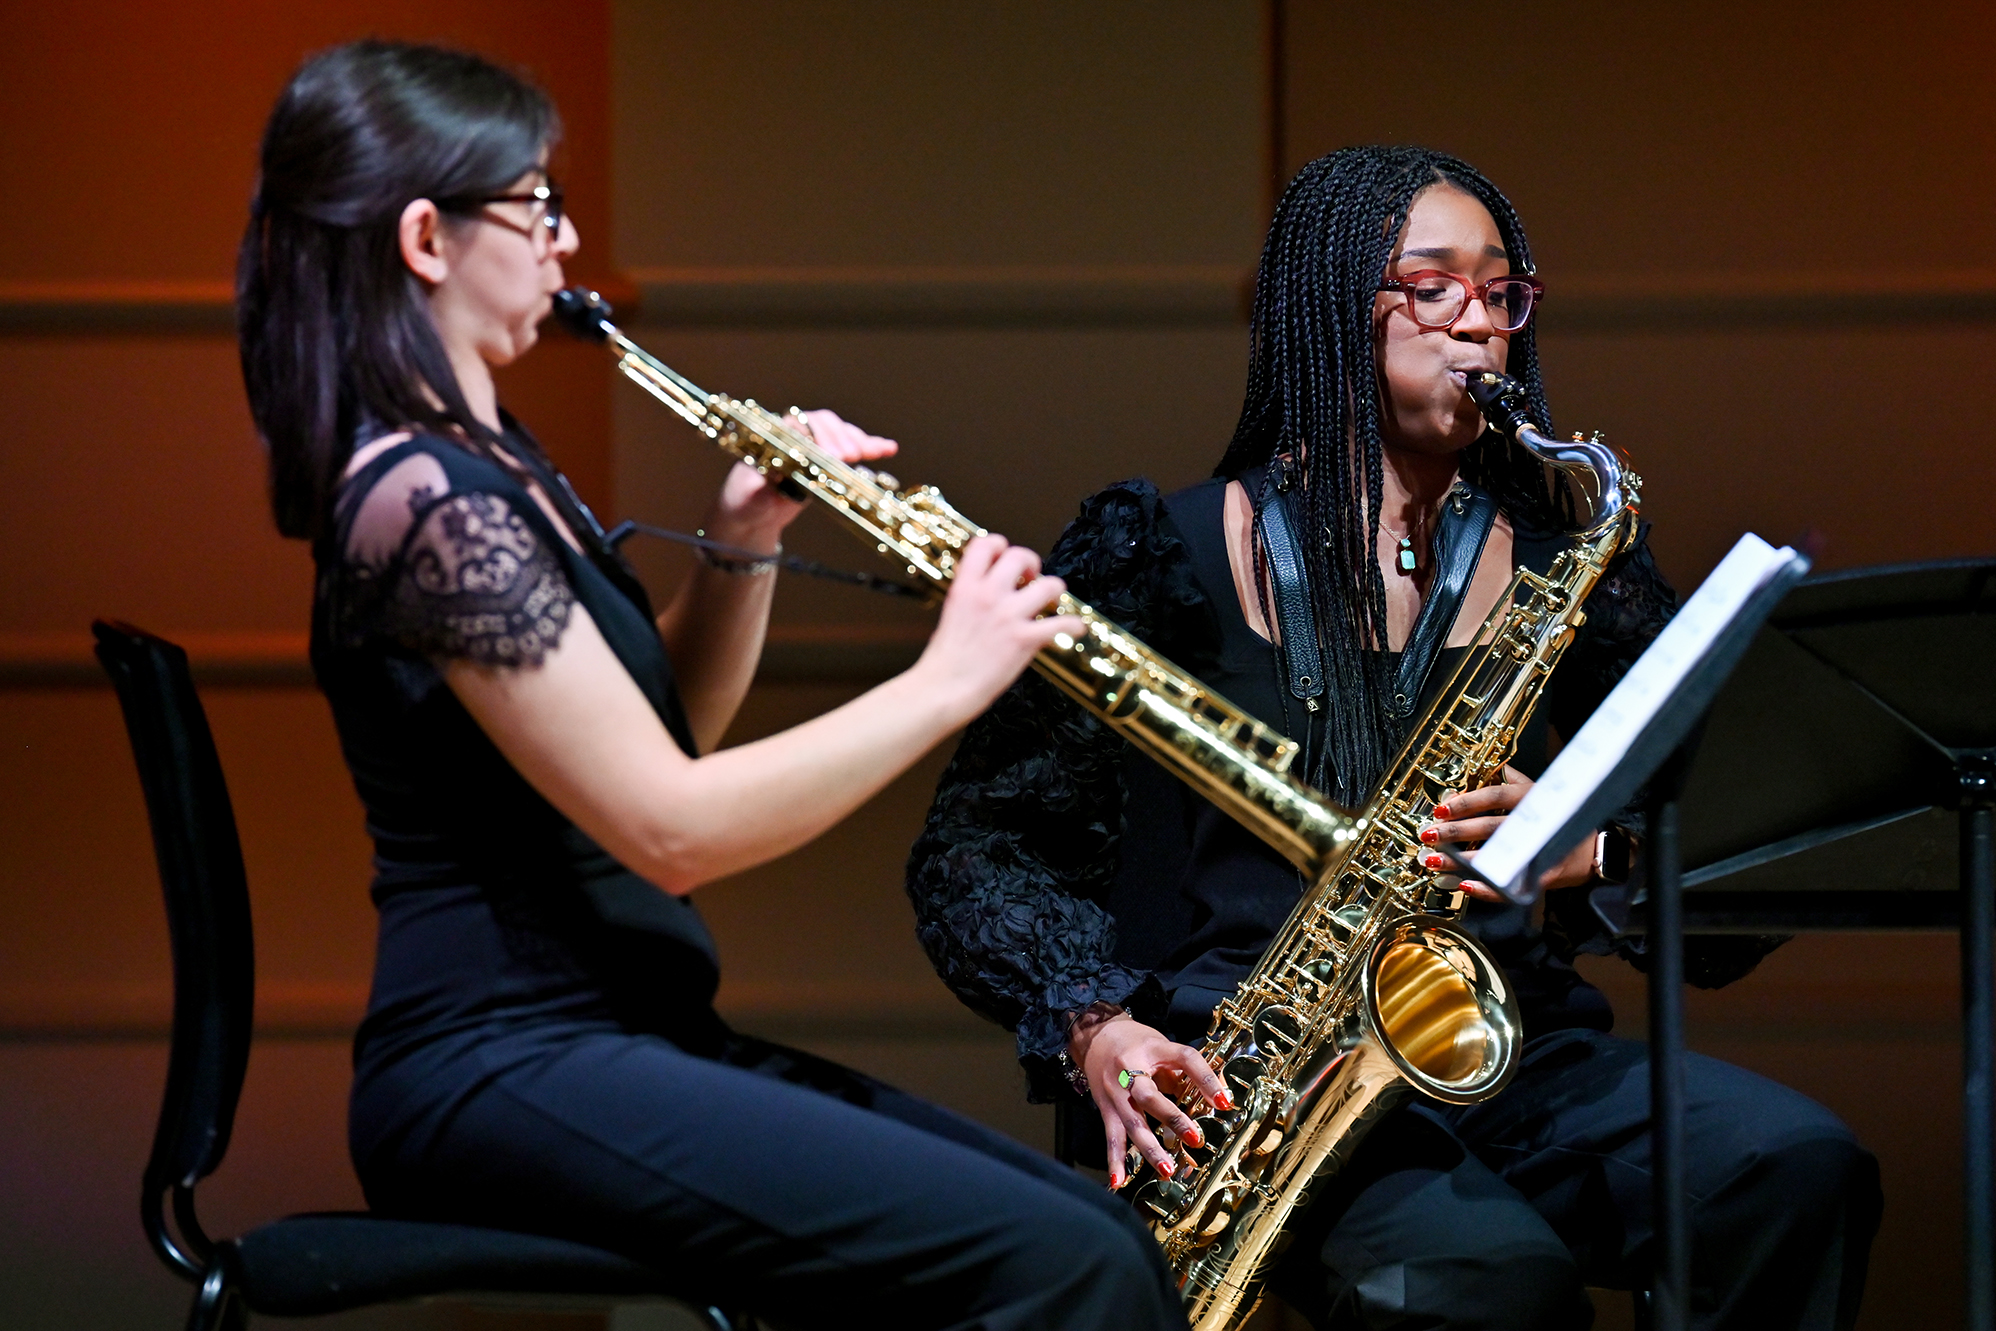 Two saxophonists performing on their saxophones in the RCM Performance Hall